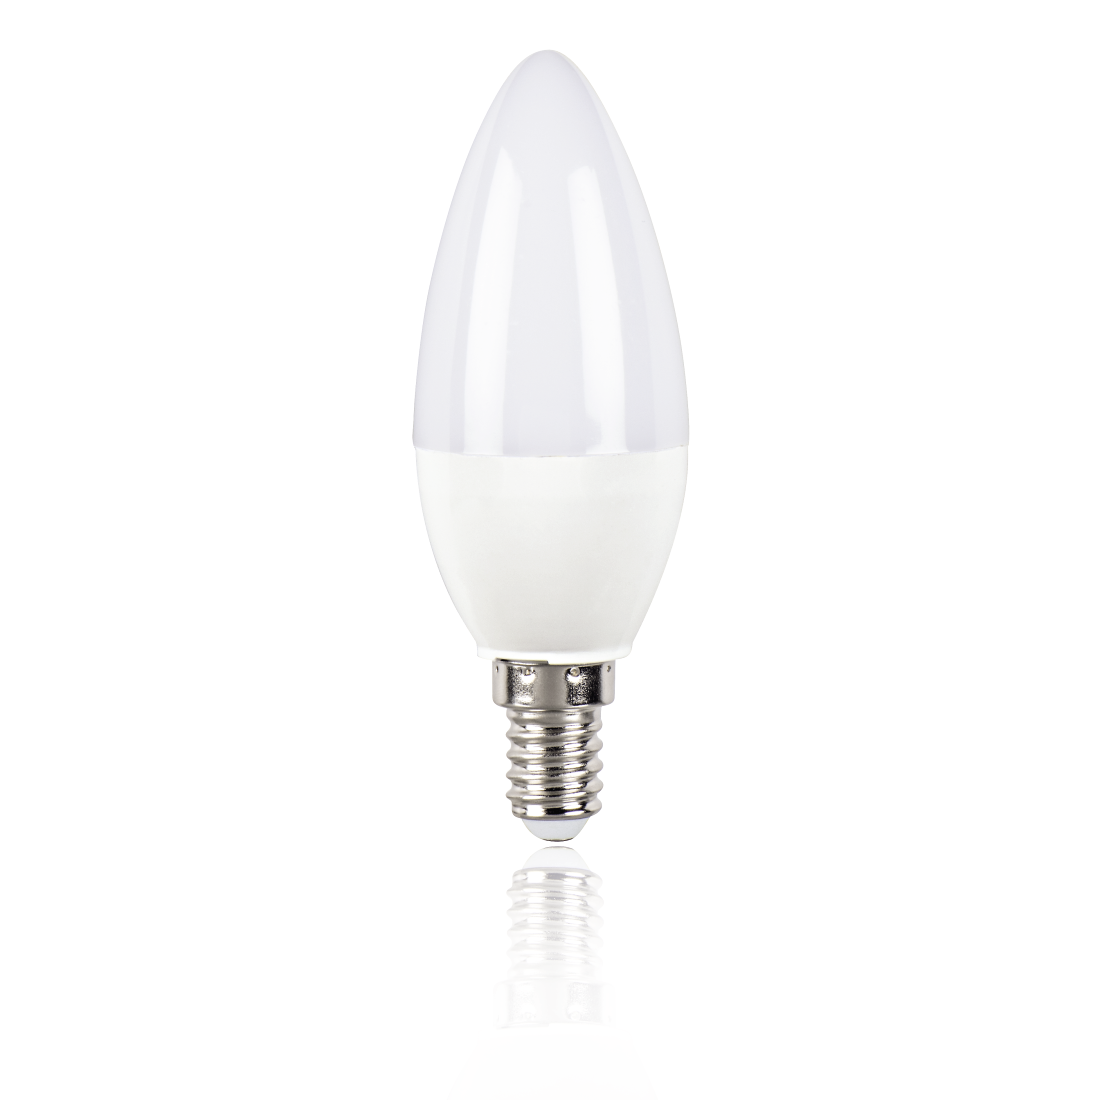 abx2 High-Res Image 2 - Xavax, LED Bulb, E14, 470lm replaces 40W Candle Bulb, daylight